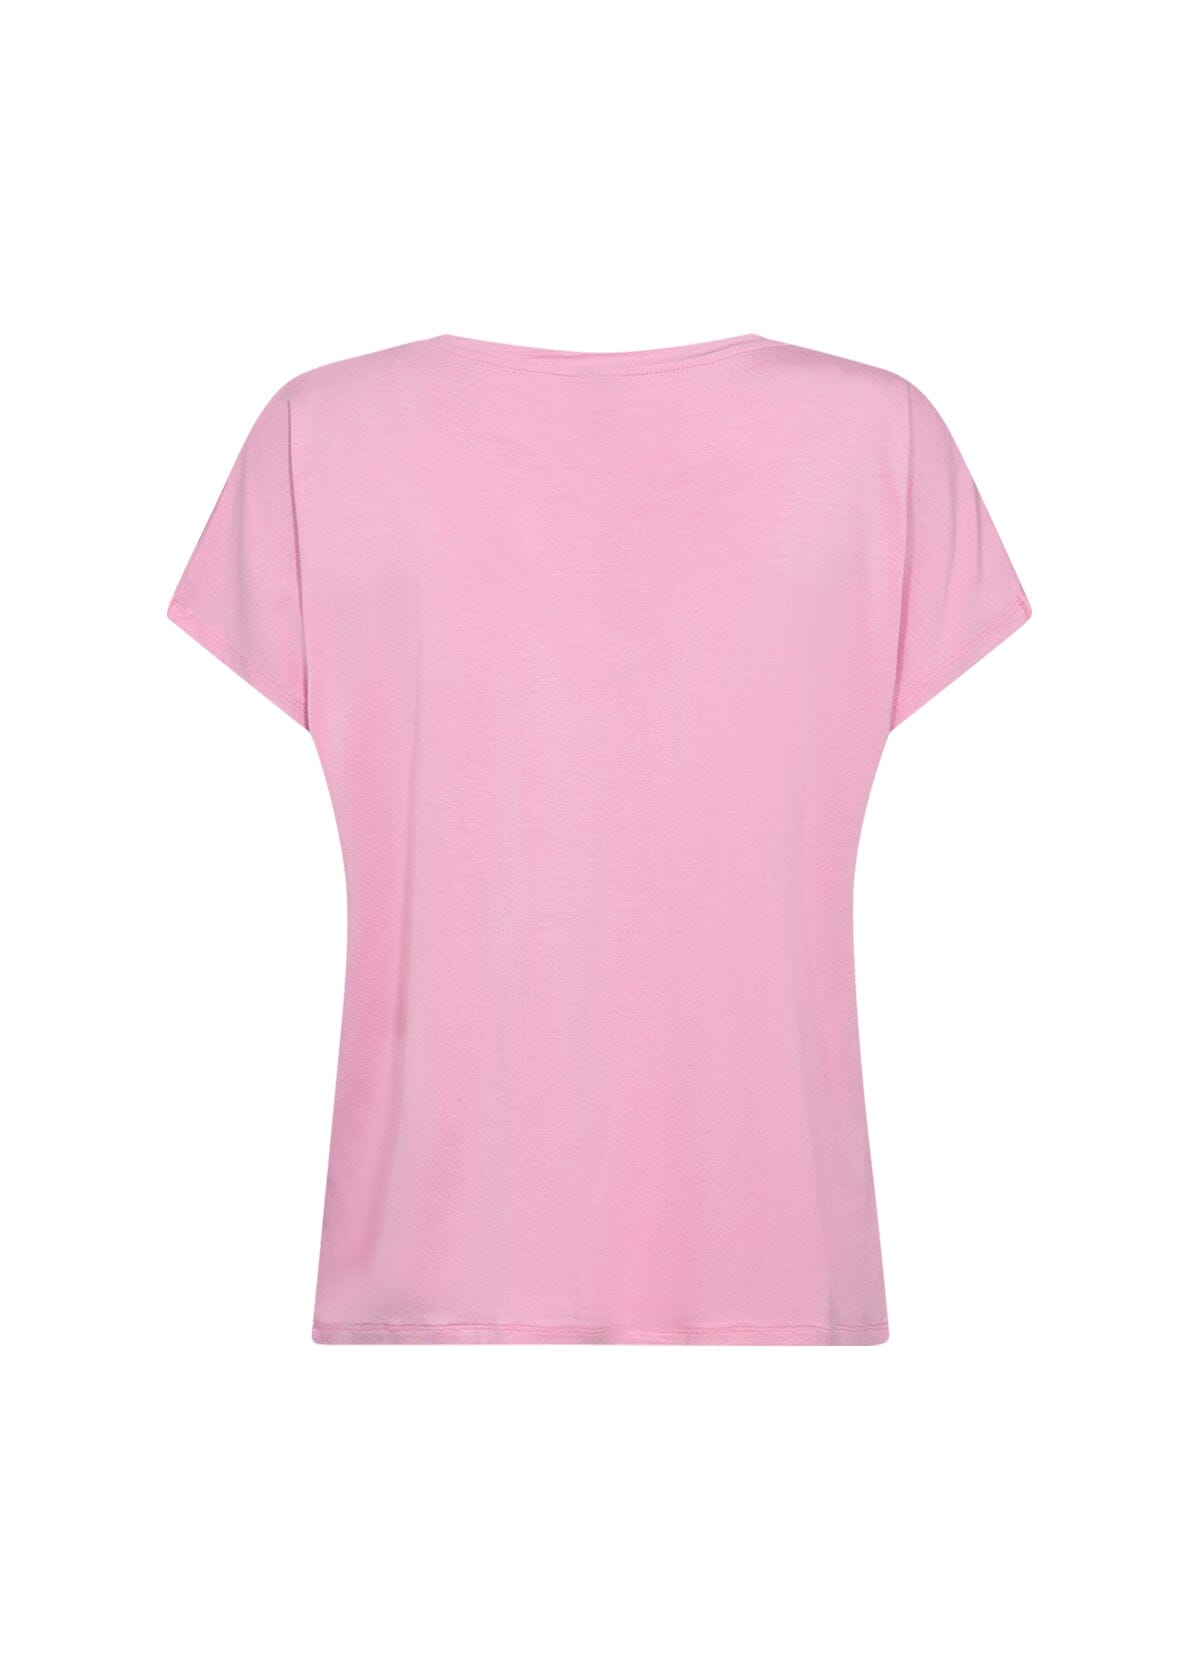 Marica T-Shirt in Pink T-Shirt Soyaconcept 